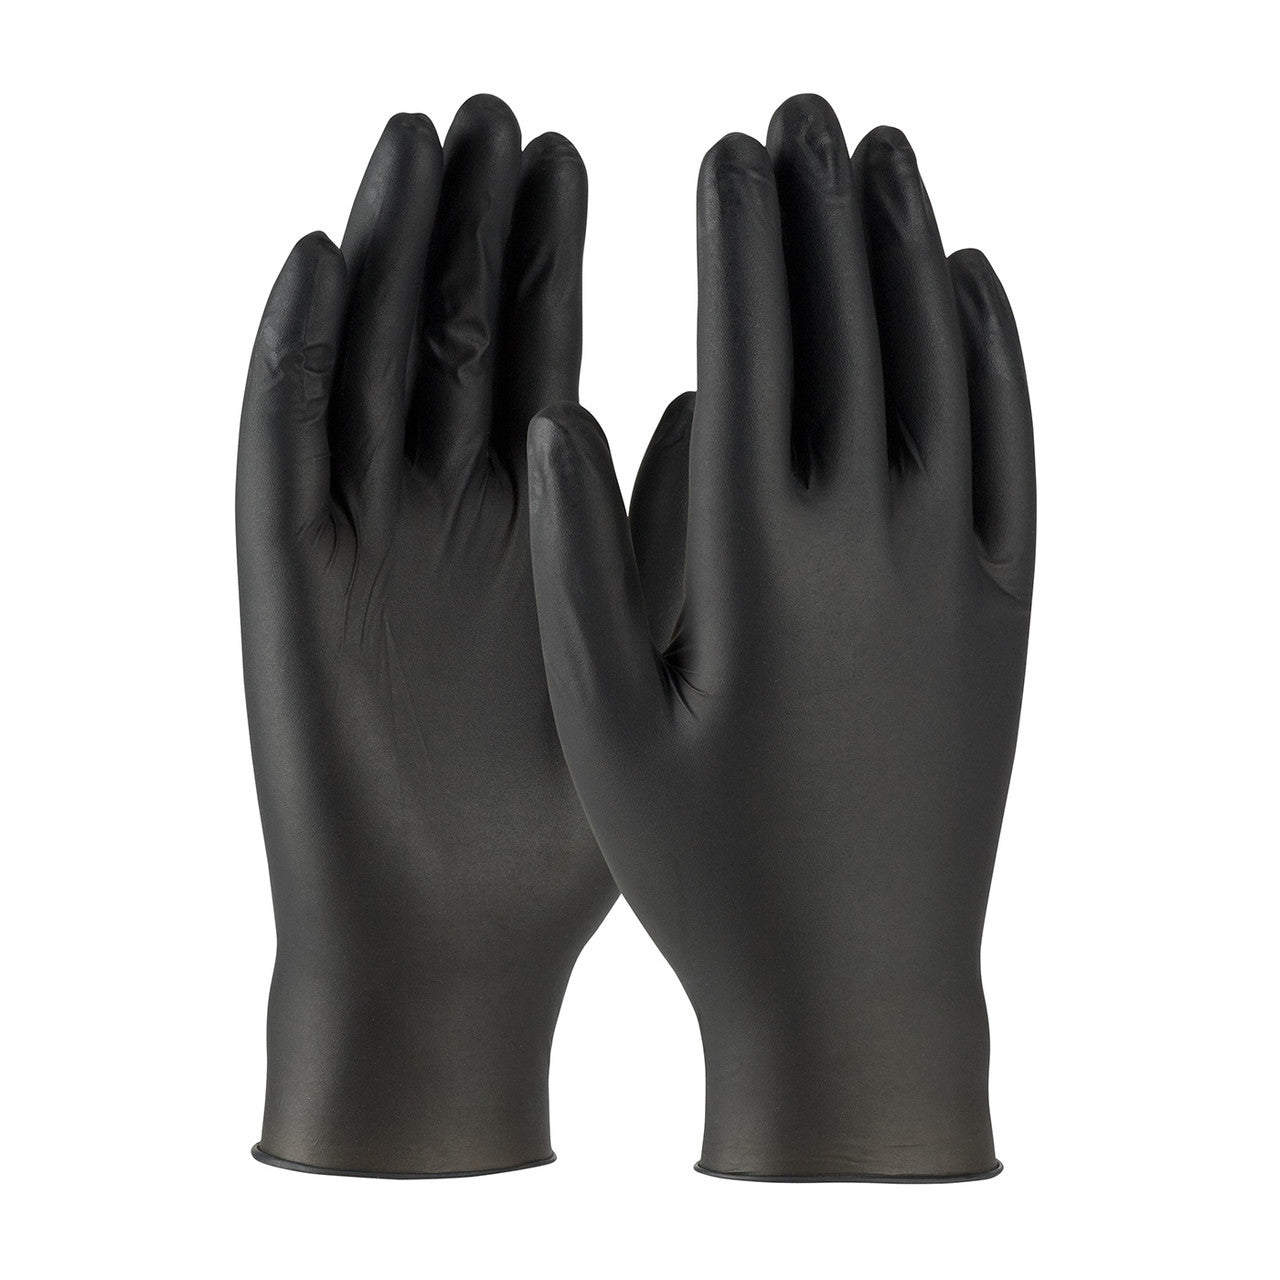 Blue Tactical BAA Compliant, Fentanyl Tested Gloves, Black, Pair